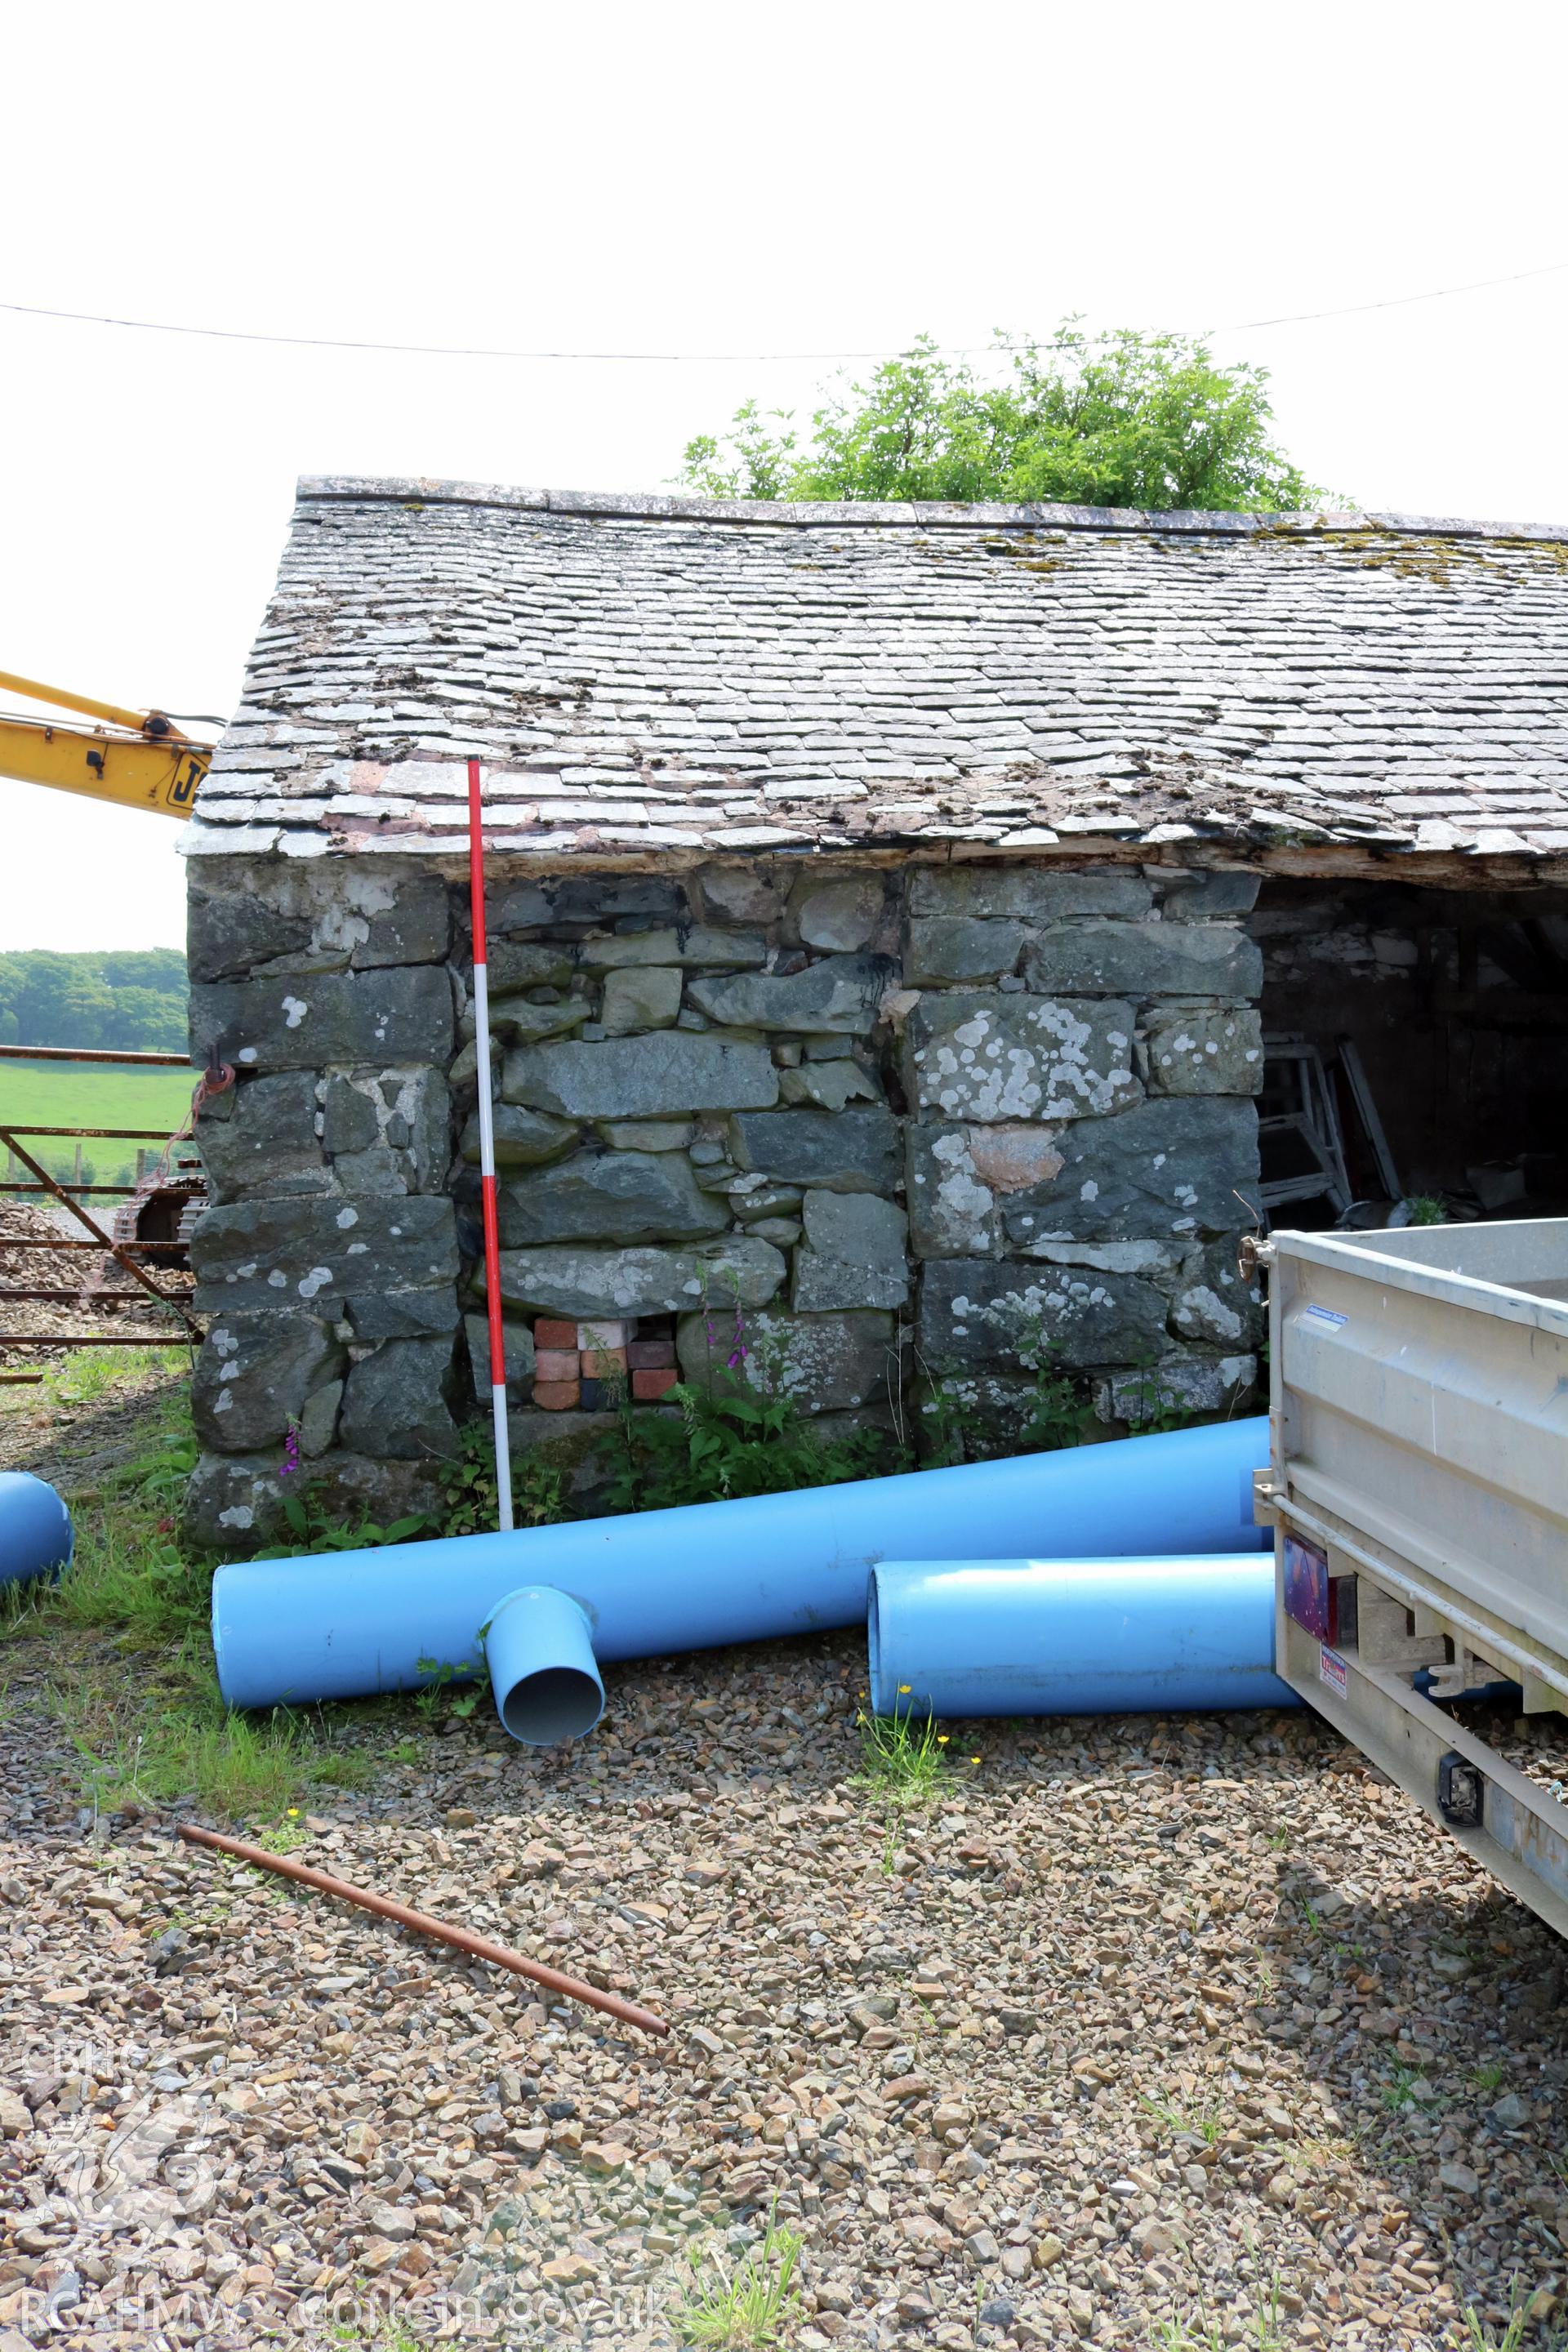 Photograph showing exterior view of cartshed and possible hayloft at Maes yr Hendre, taken by Dr Marian Gwyn, 6th July 2016. (Original Reference no. 0122)